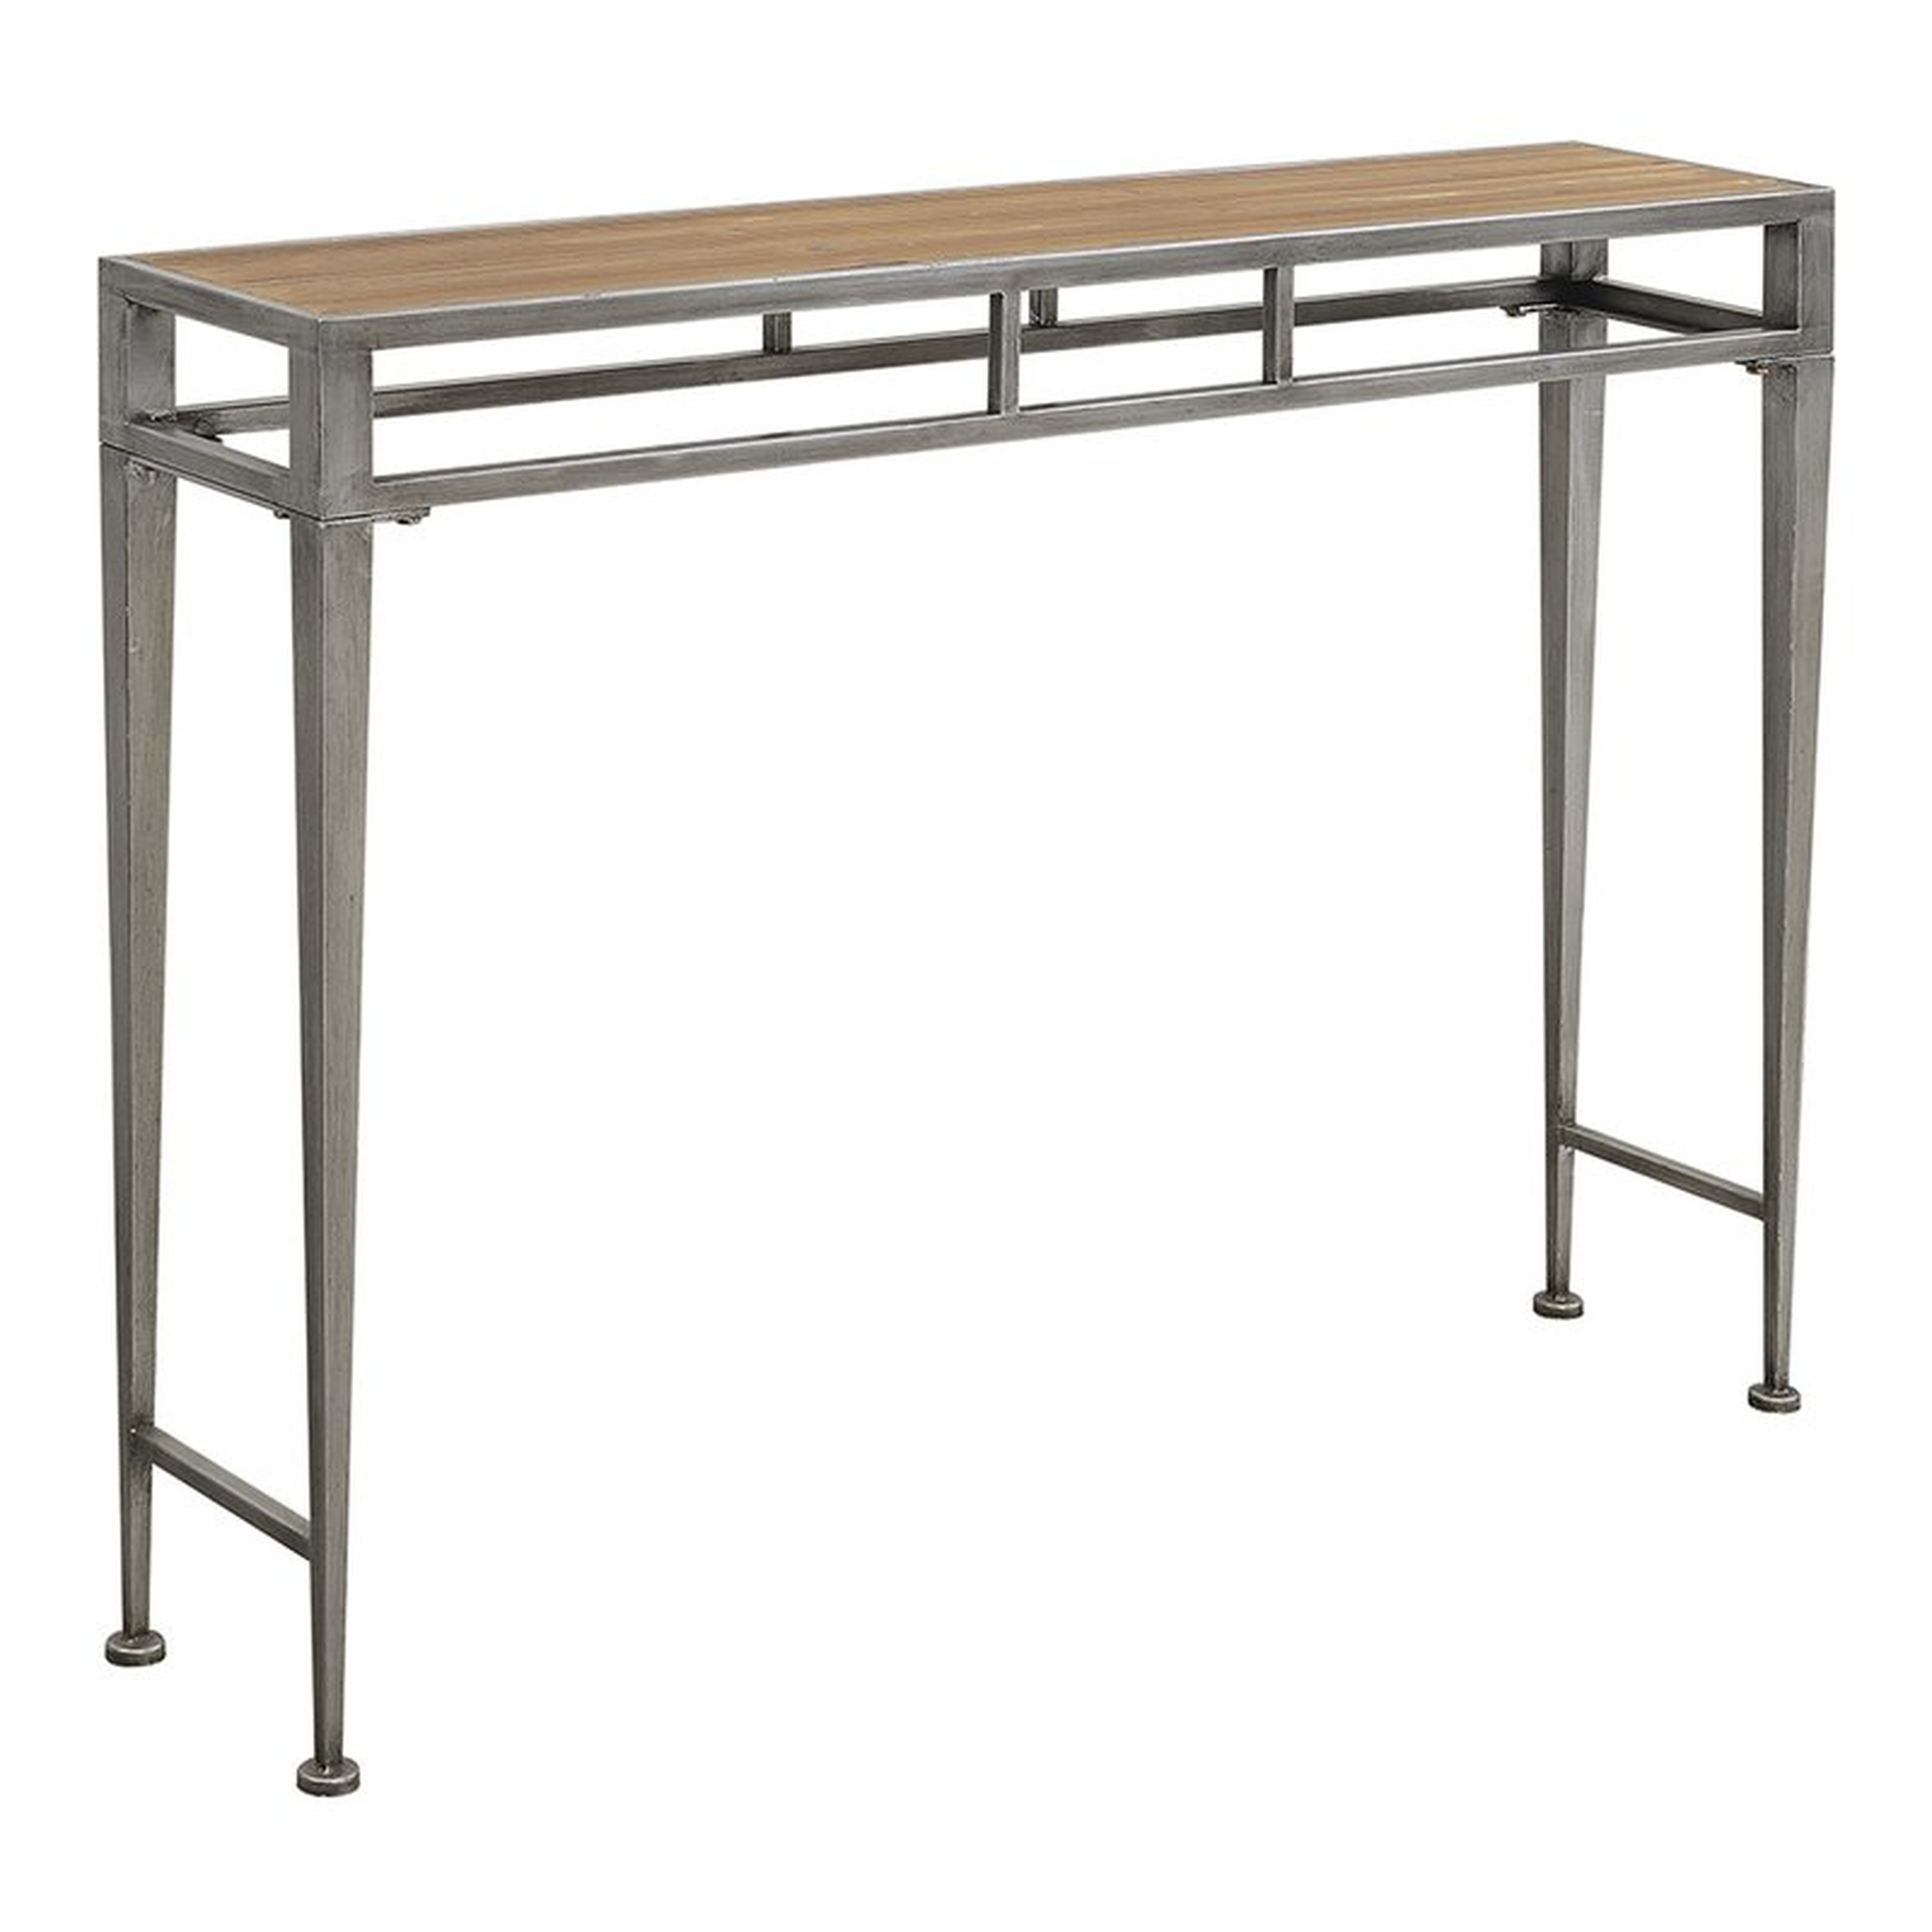 Justis Console Table - Wayfair